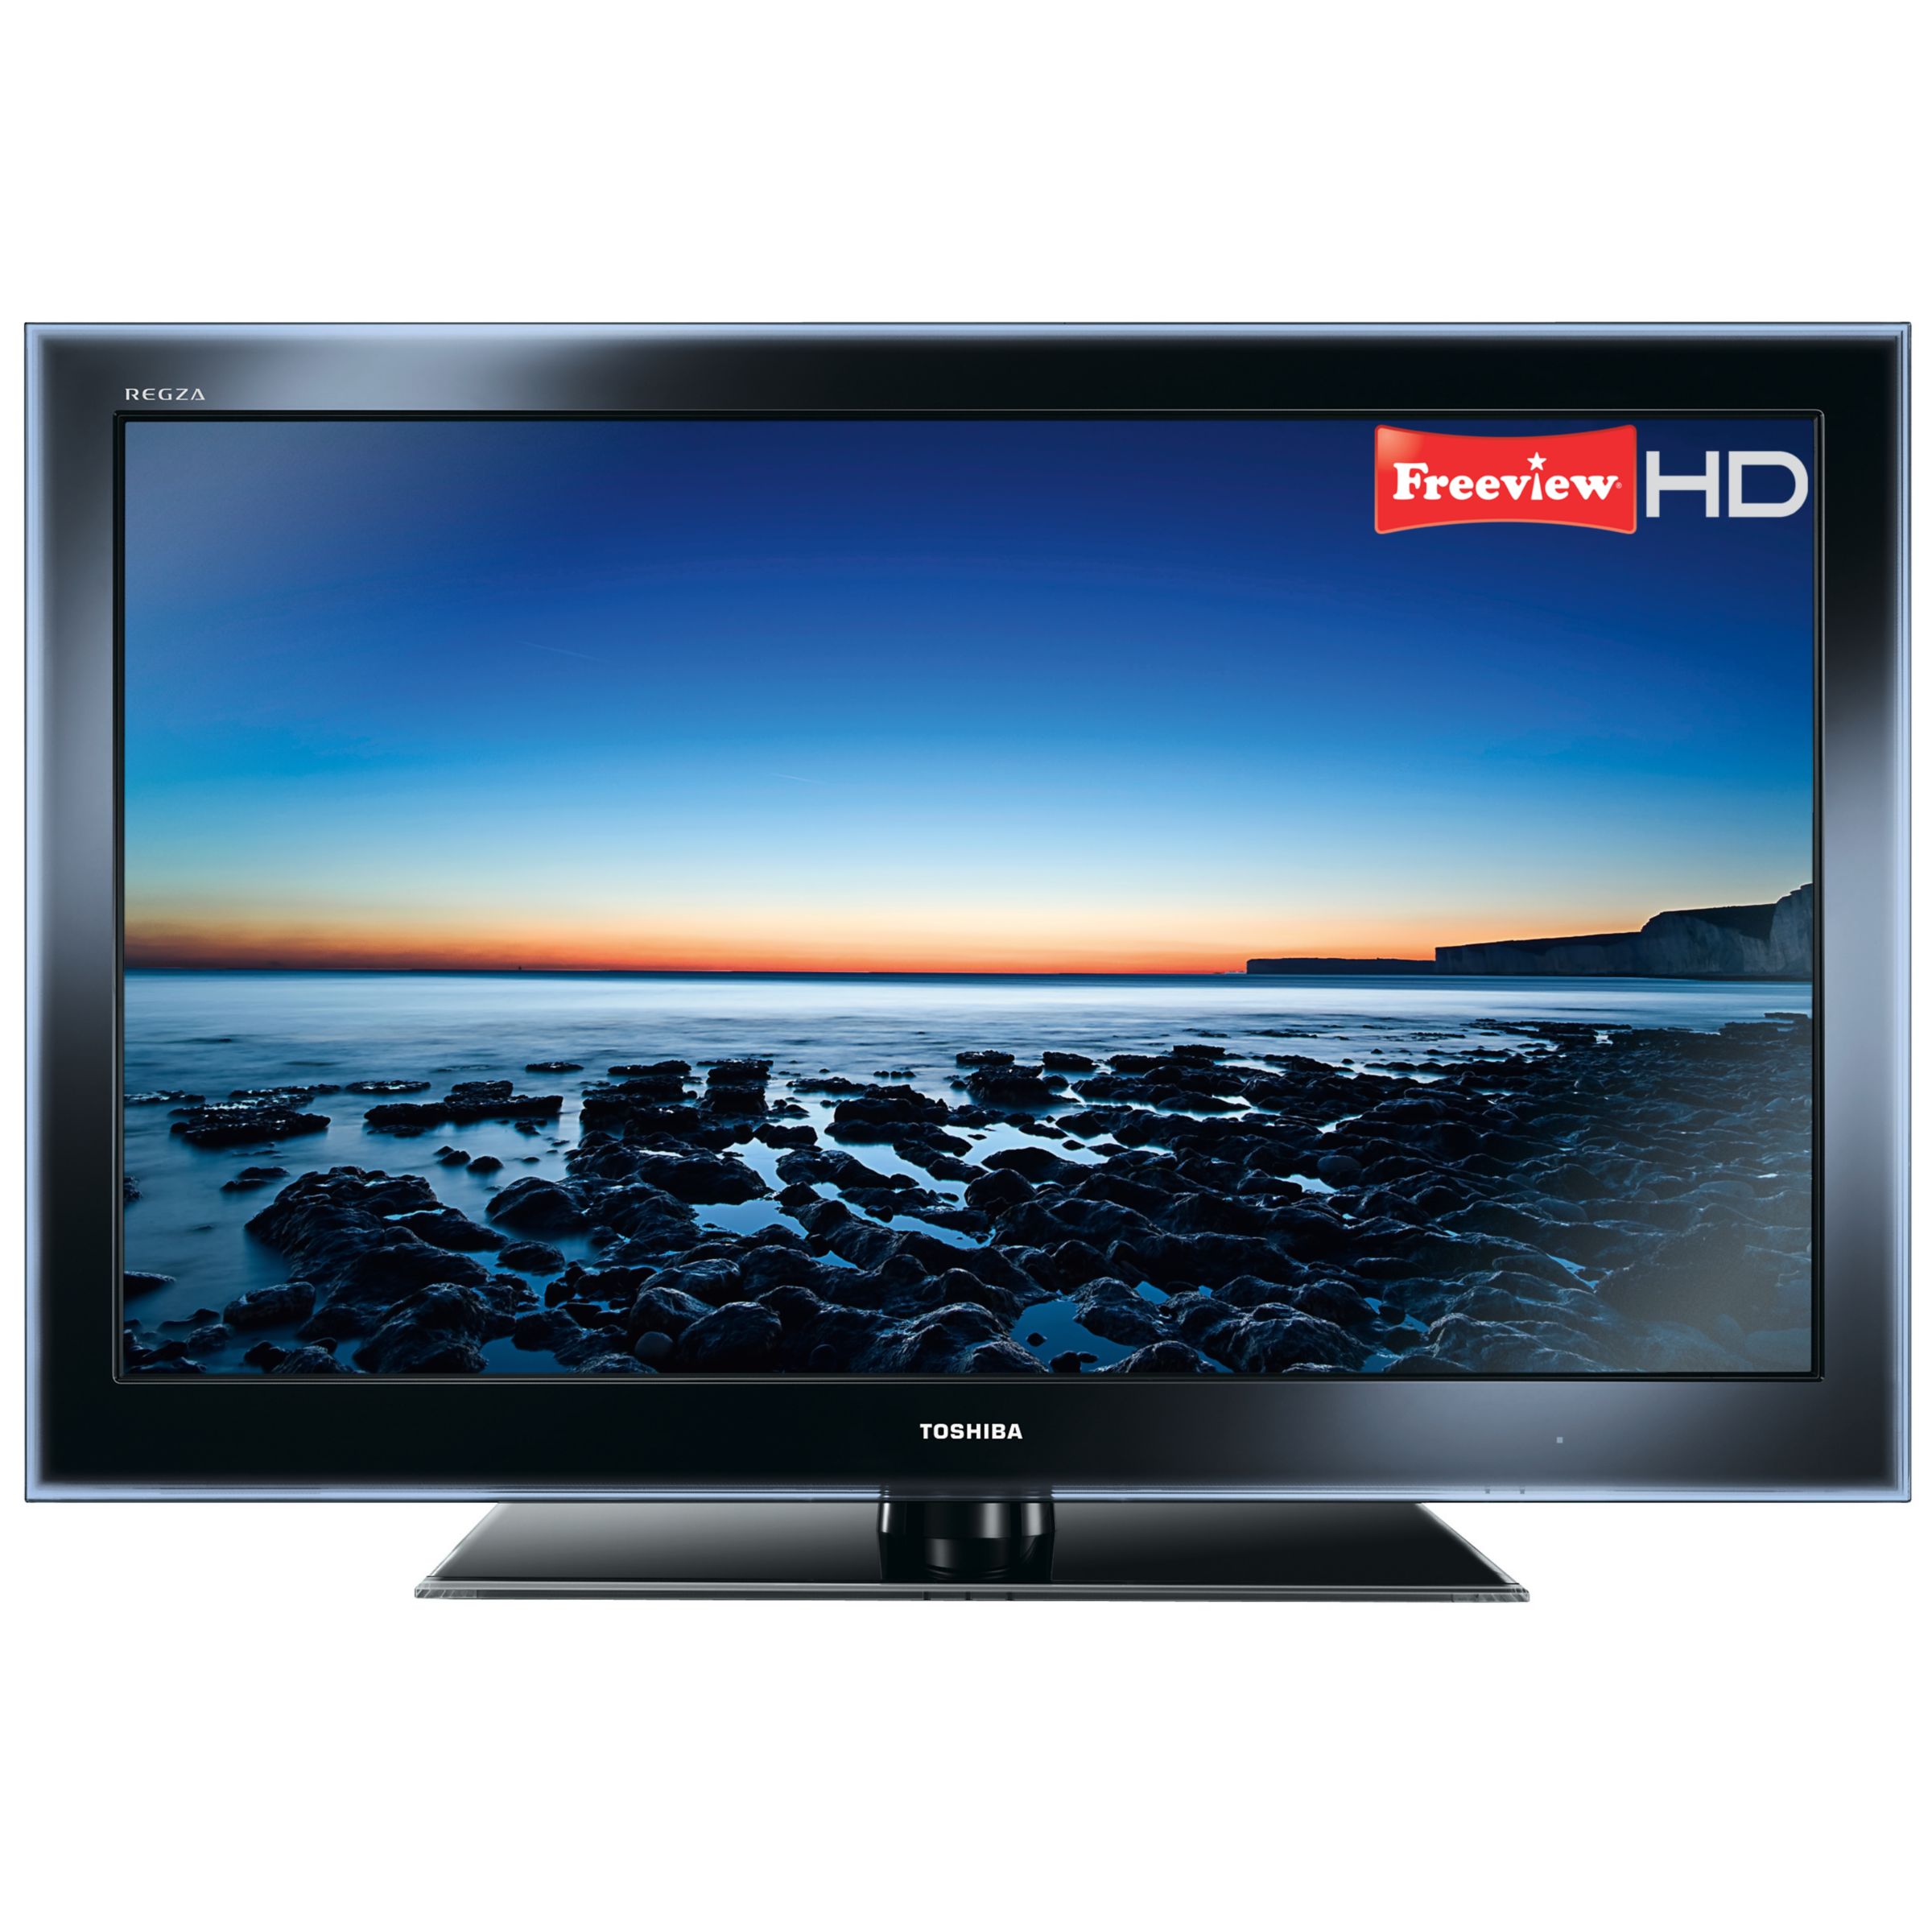 Toshiba Regza 40SL753 LED HD 1080p Digital Television, 40 Inch with Built-in Freeview HD at John Lewis